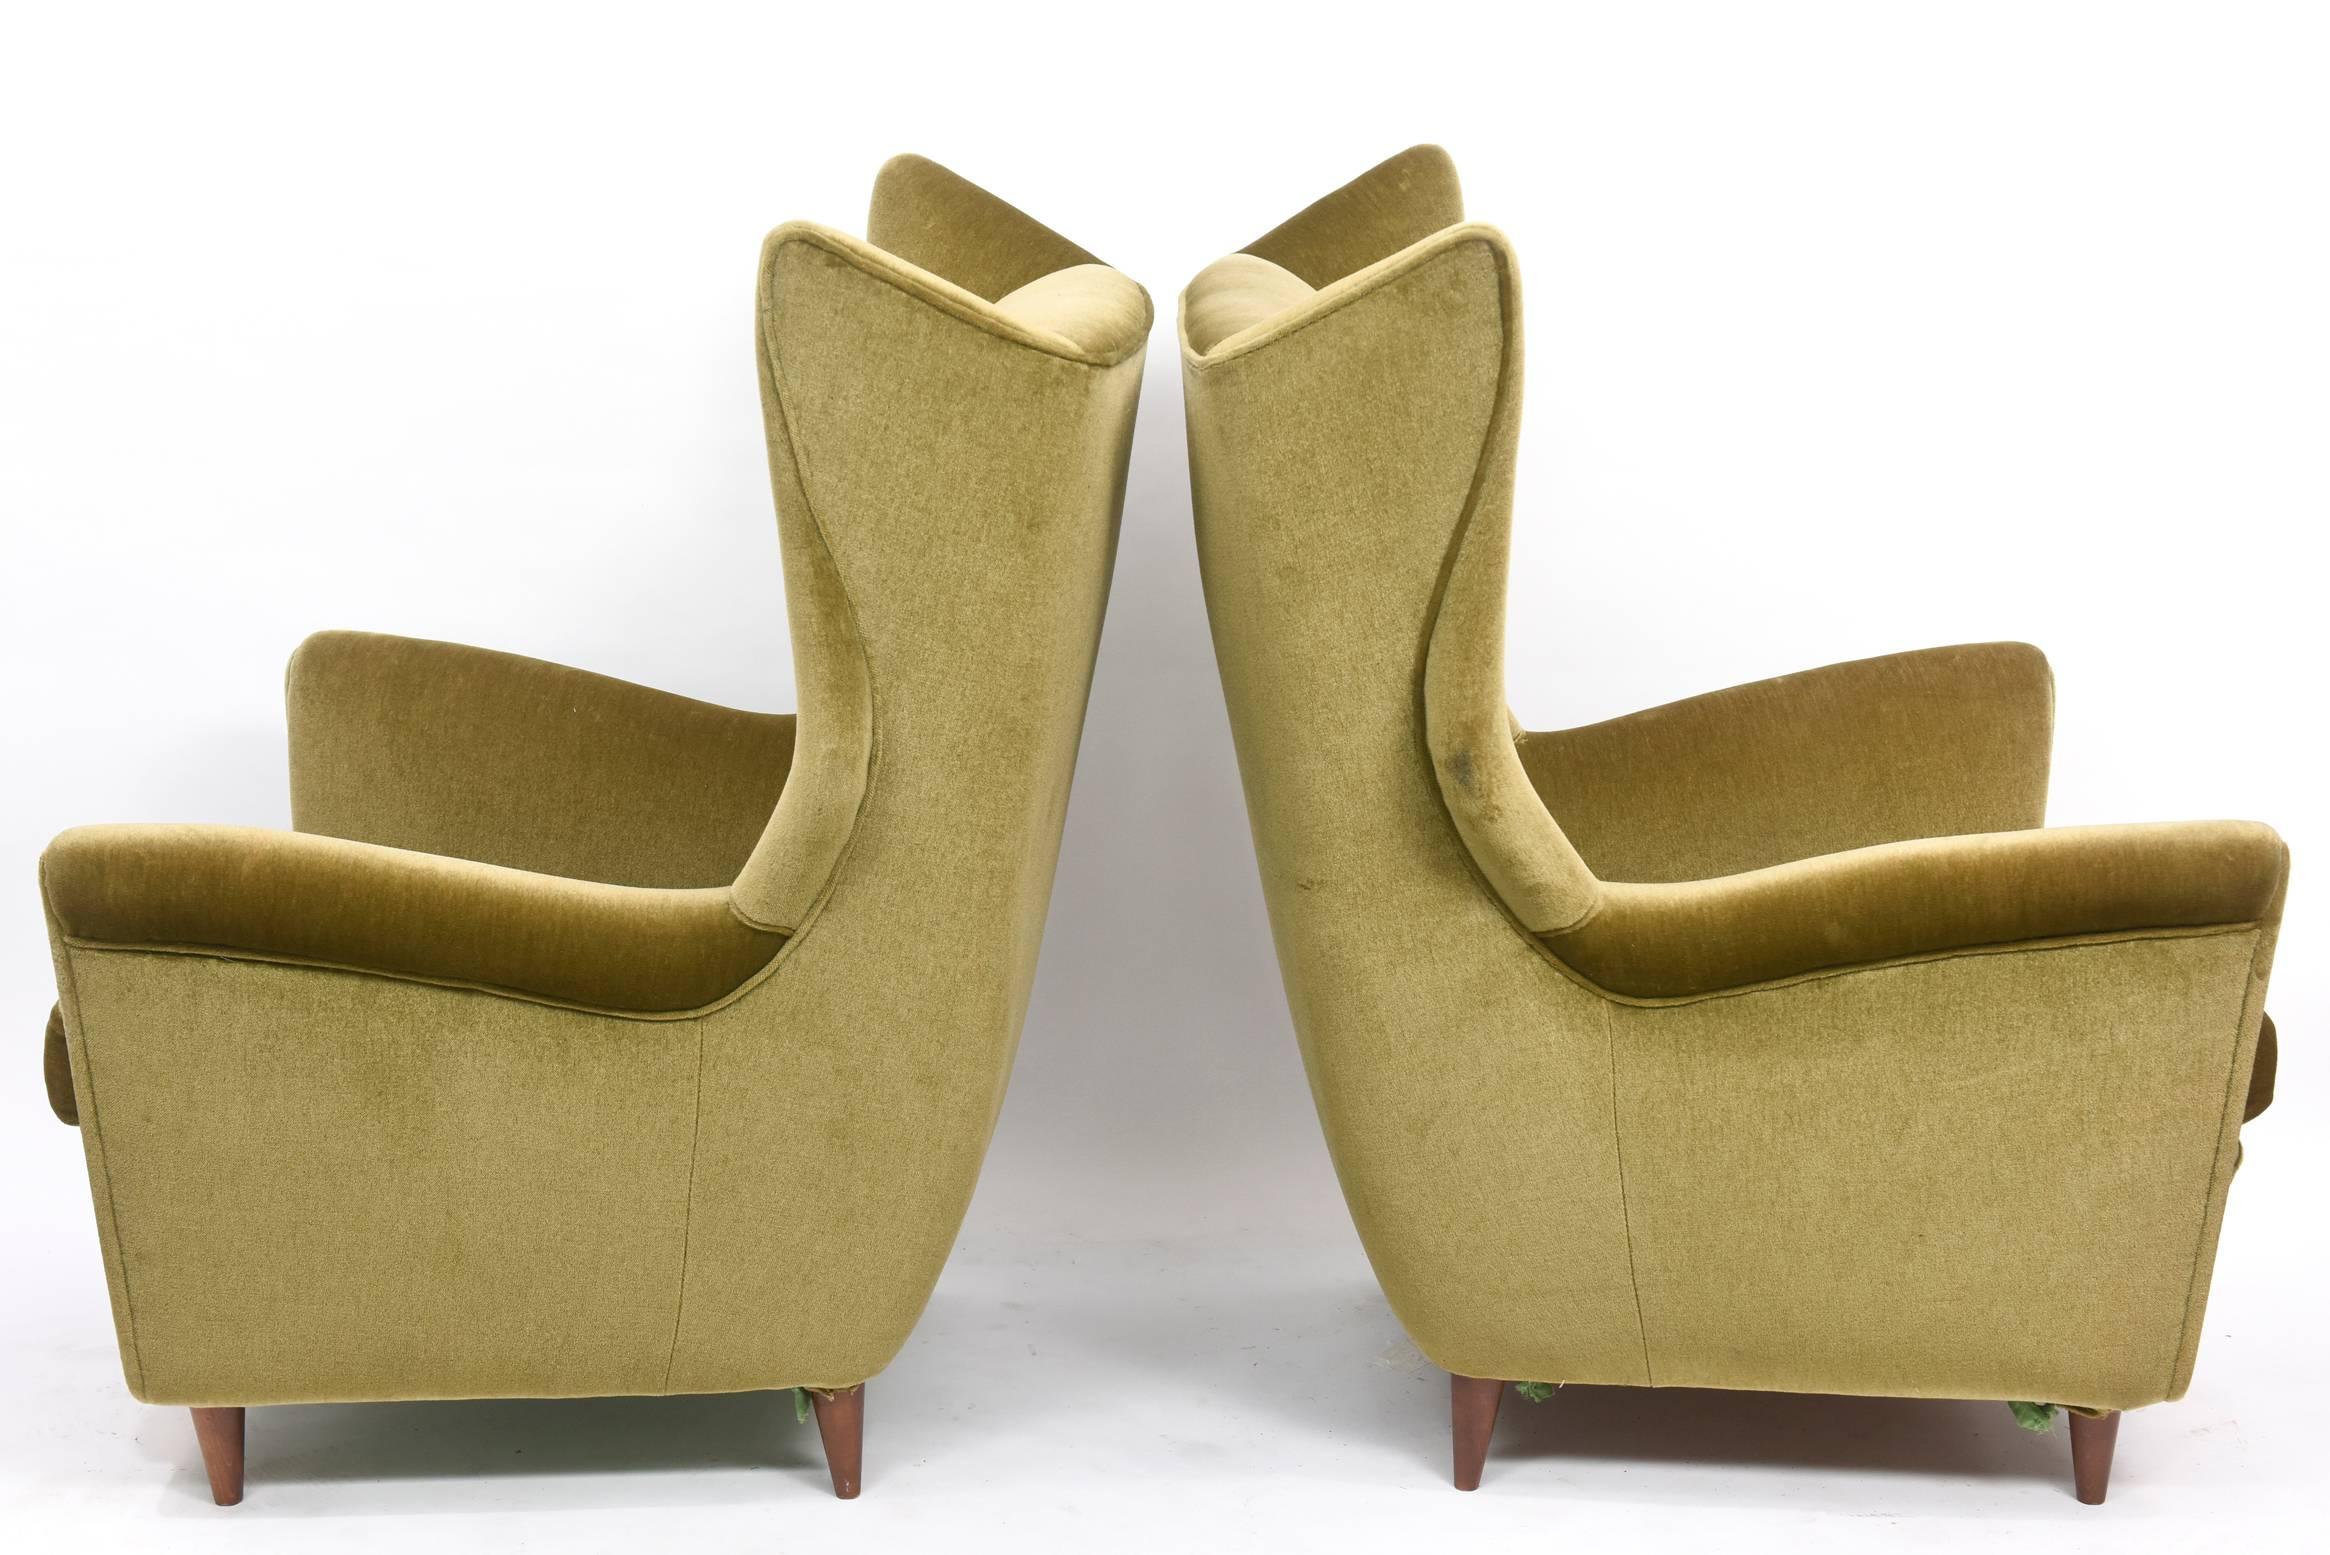 Large and imposing pair of Italian modern lounge chairs with high backs and wings on round tapering legs.